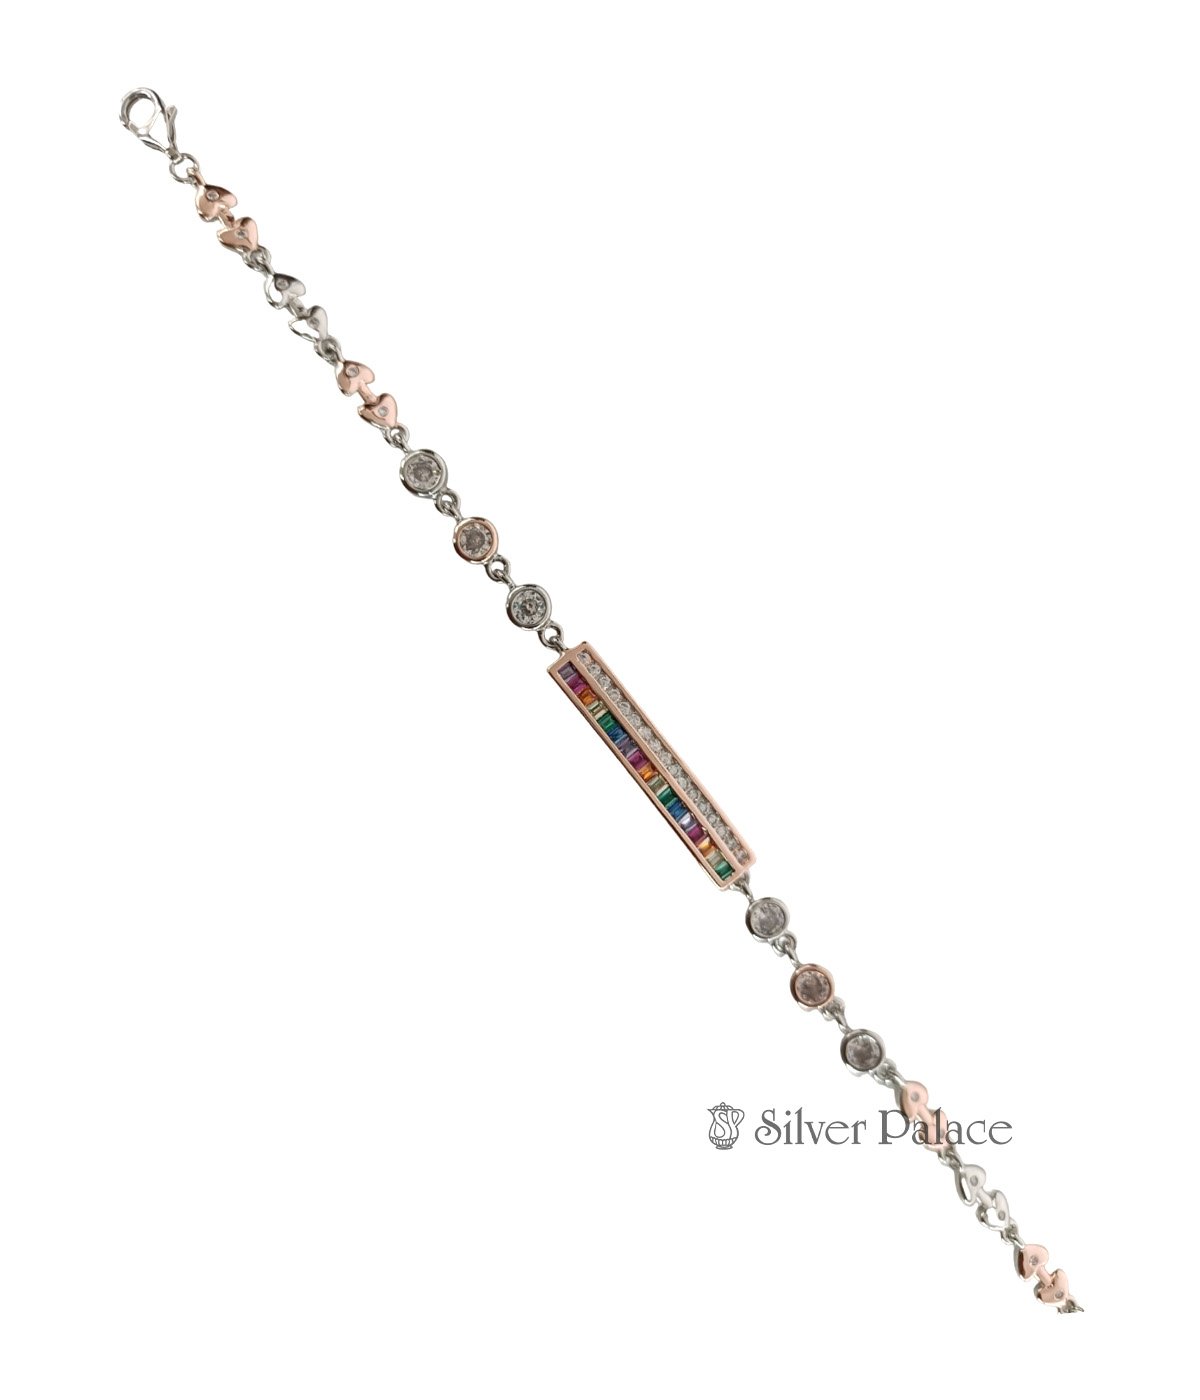 92.5 STERLING SILVER COLOR STONES BRACELET WITH ROSE GOLD TOUCH